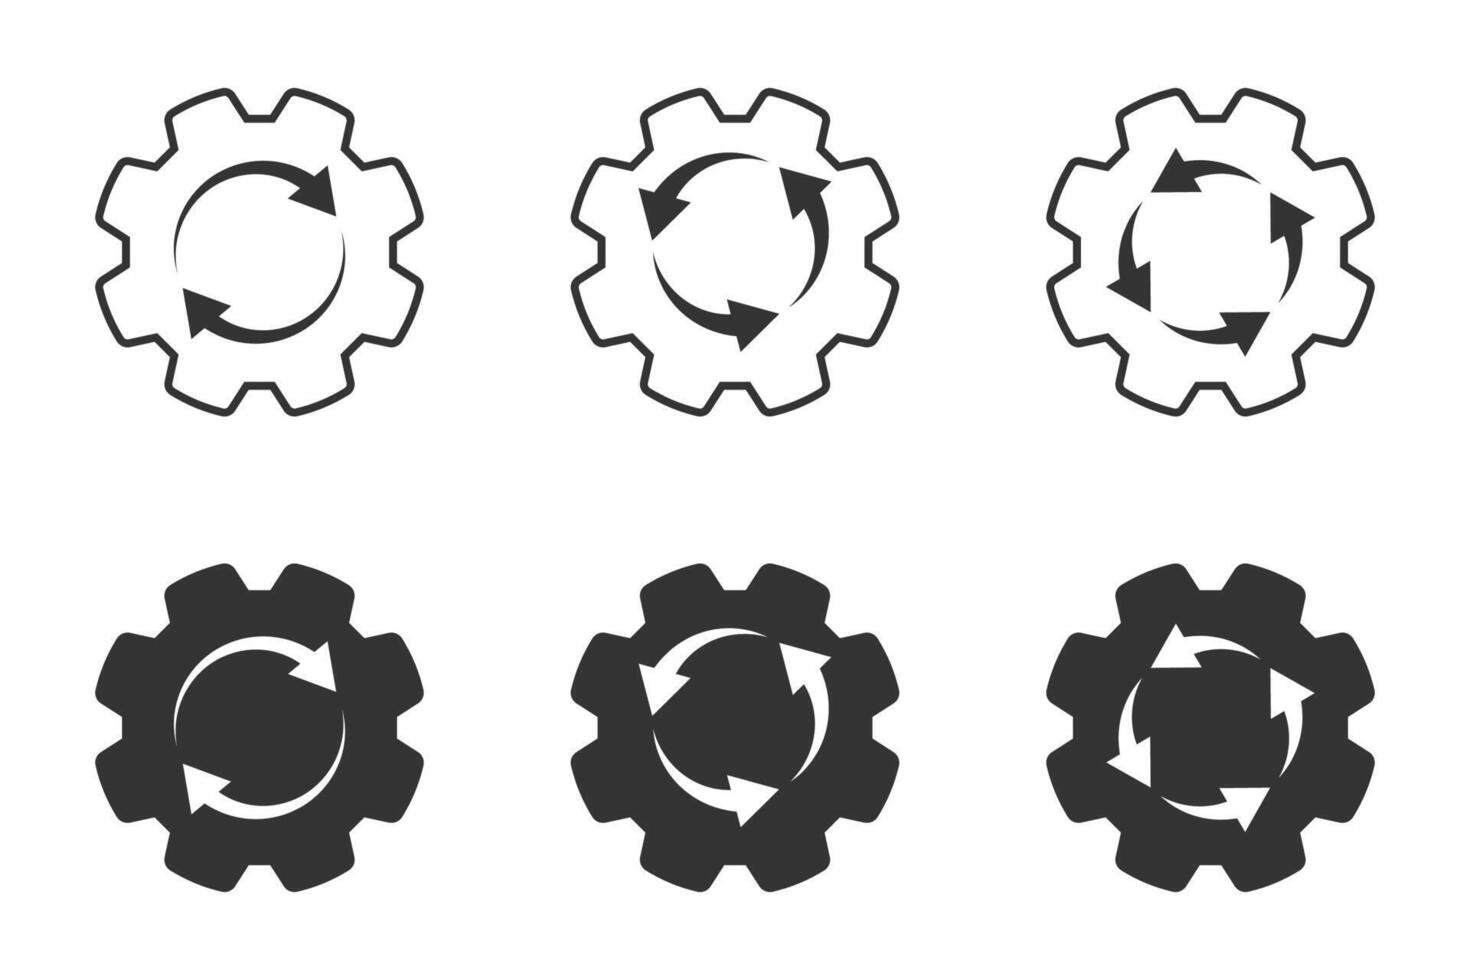 Workflow icon. Set of gear wheels icons with arrows inside. Vector illustration.